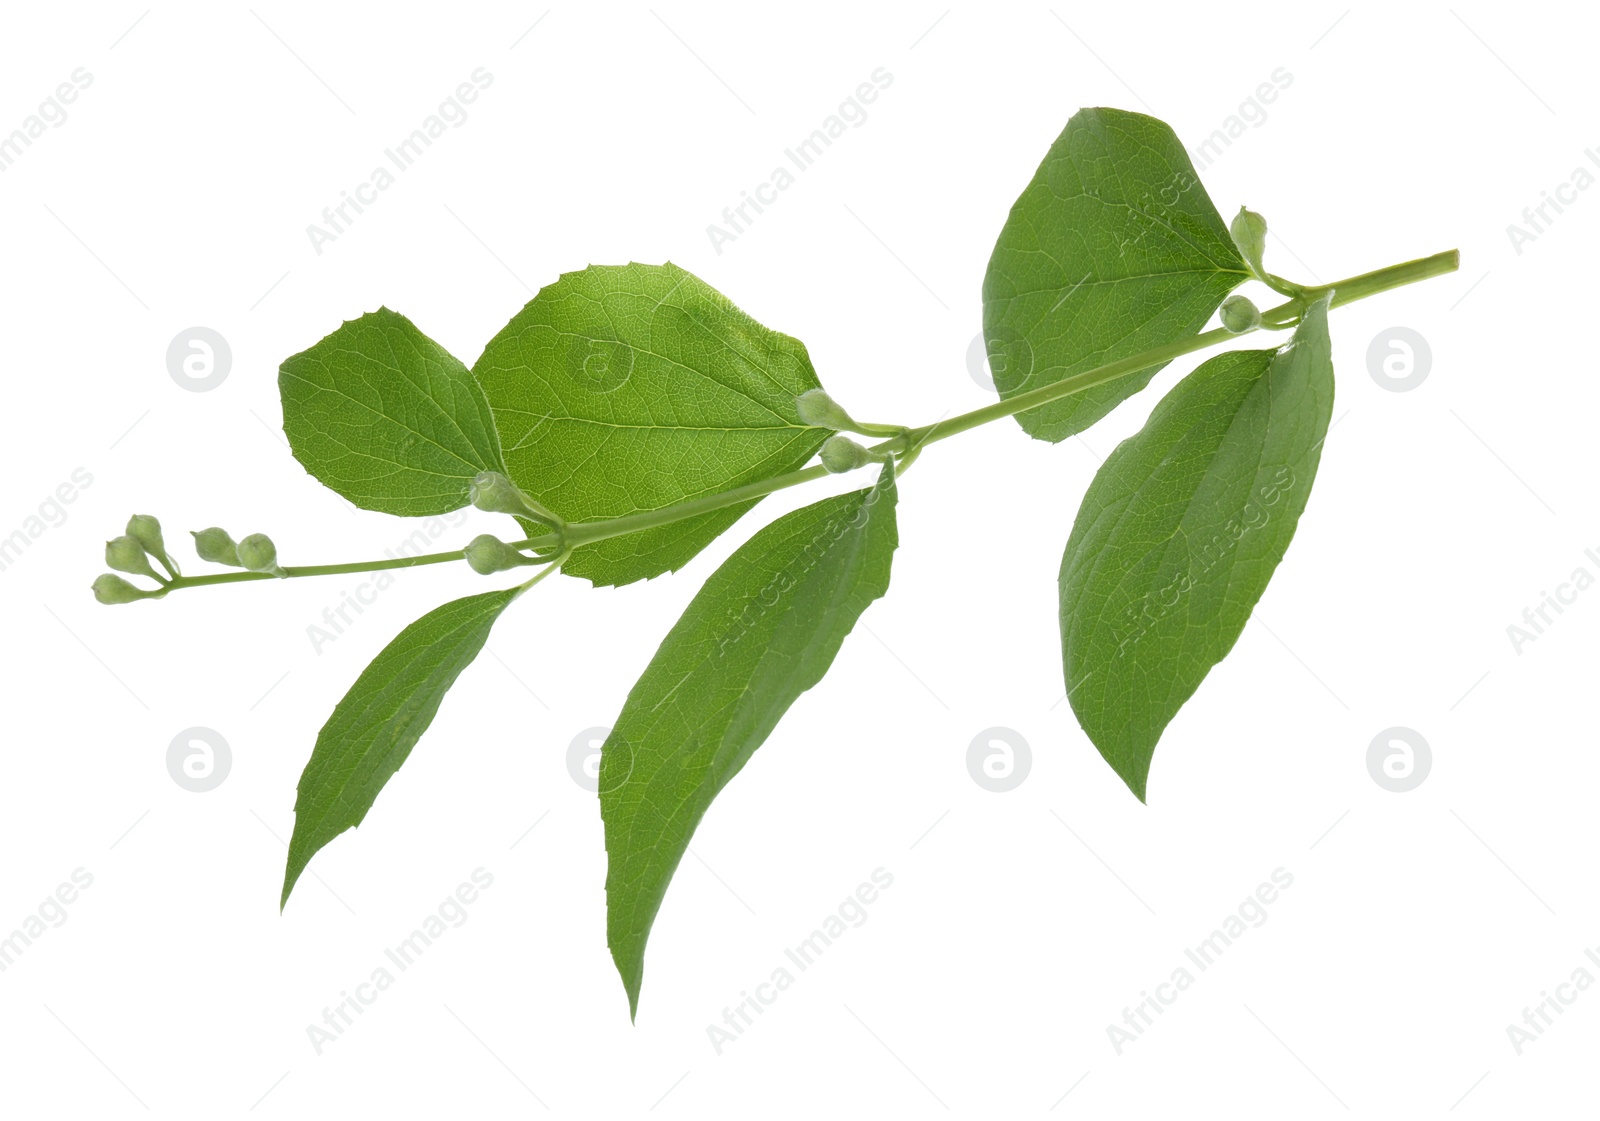 Photo of Jasmine branch with fresh green leaves and buds isolated on white